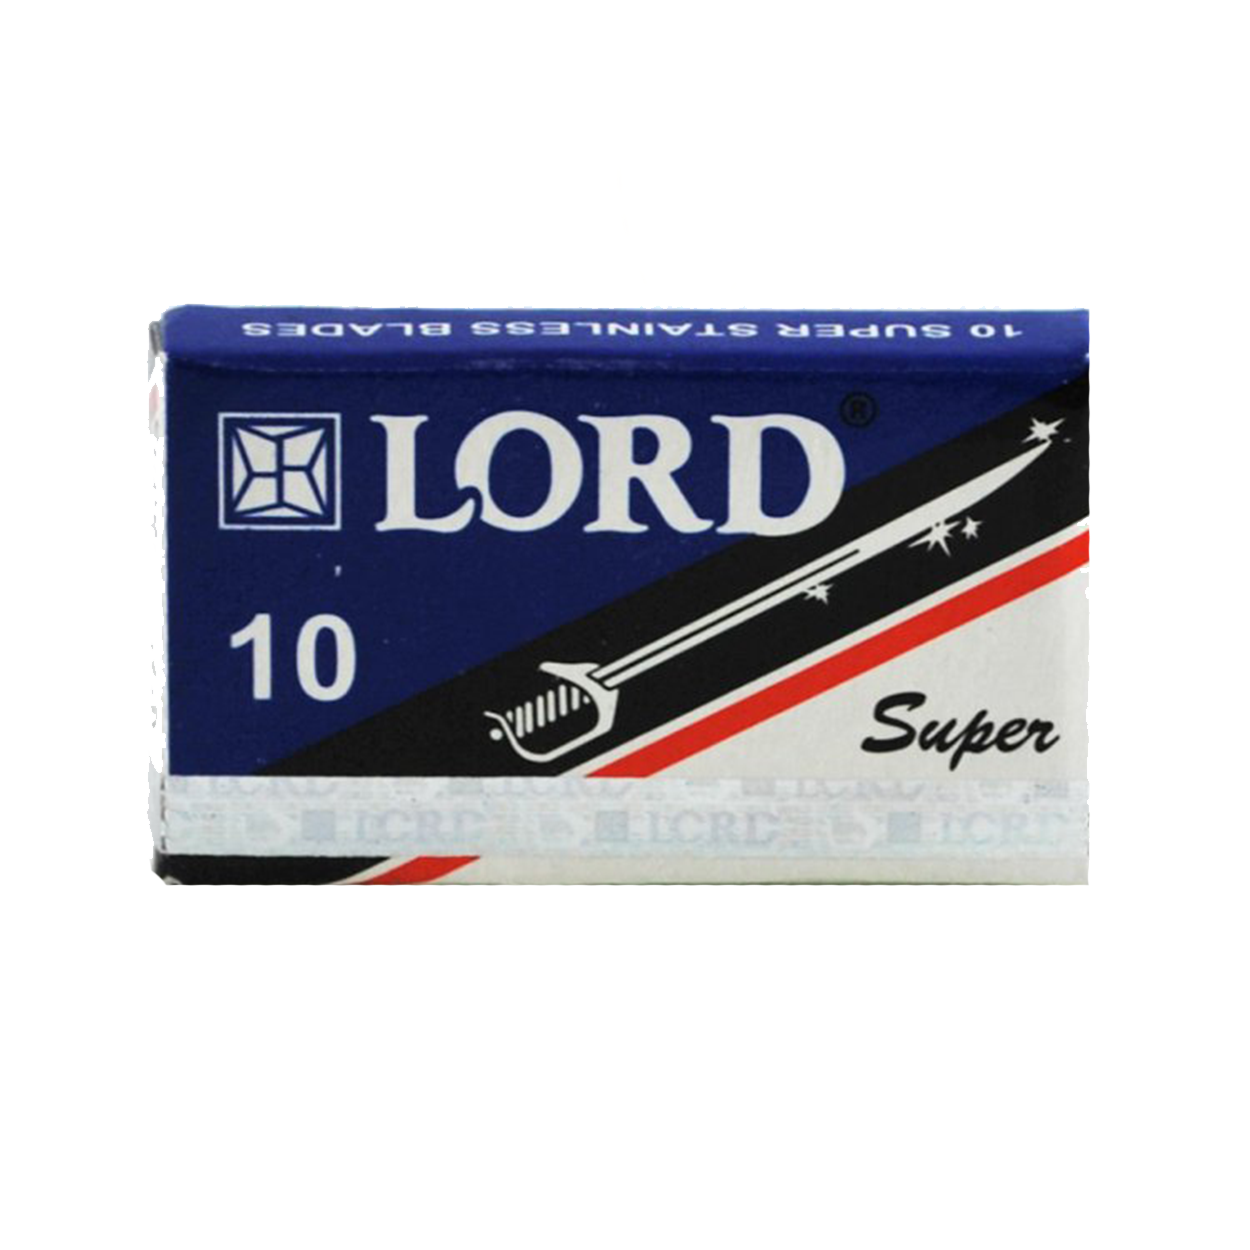 Lord Super Stainless Double Edge Razor Blades - 10 blades